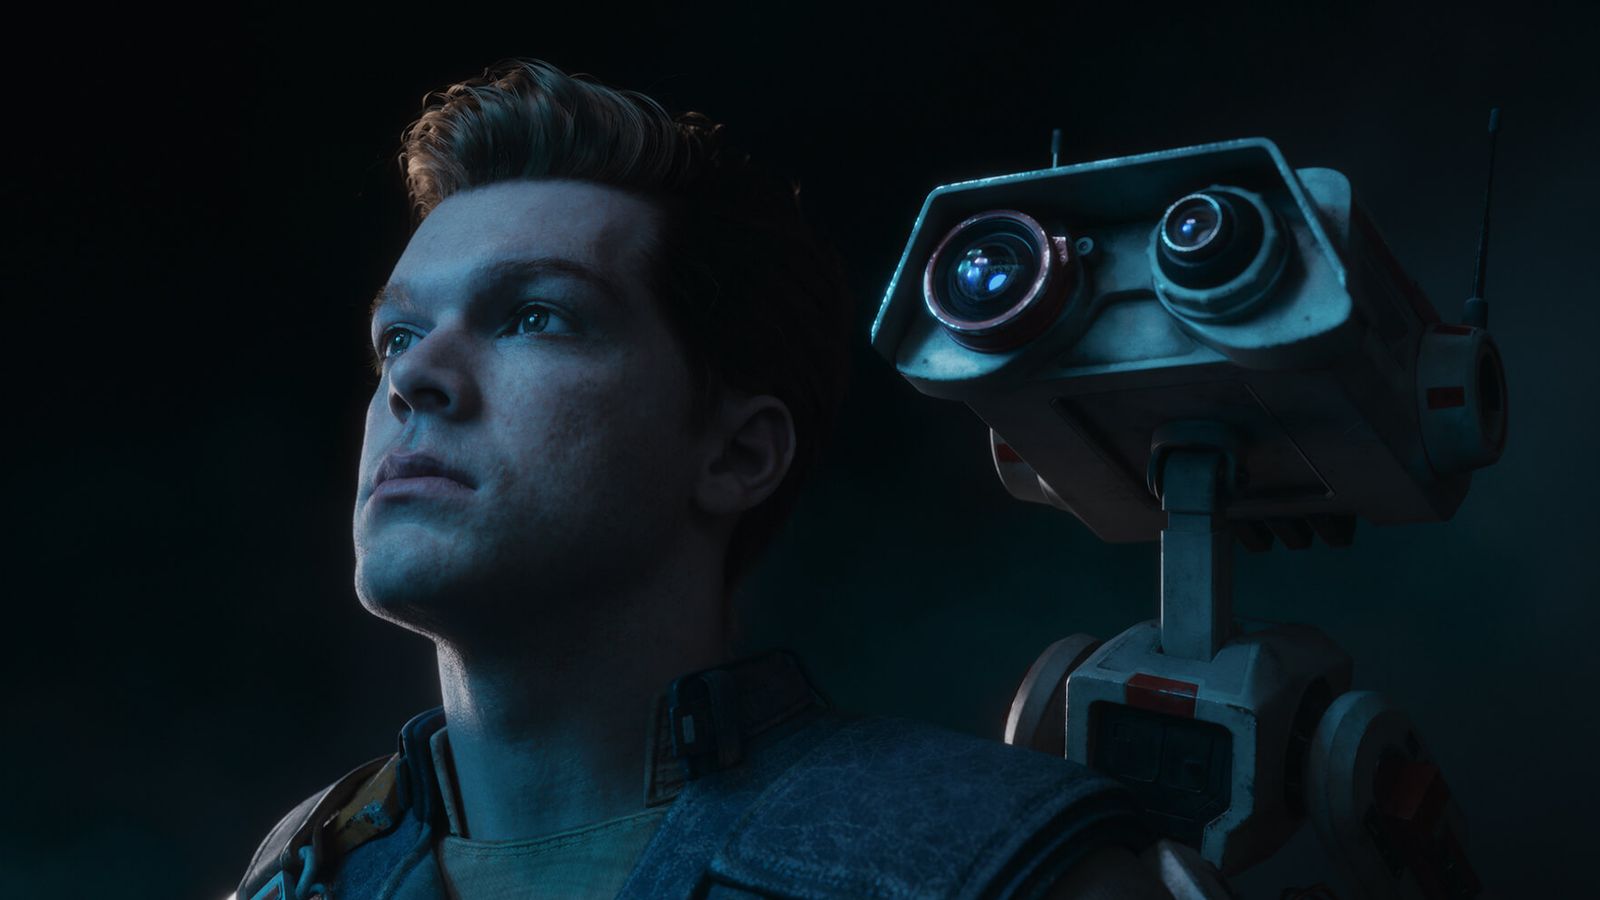 Star Wars Jedi: Survivor star Cameron Monaghan tips more film and TV actors to follow him into 'really exciting' gaming roles